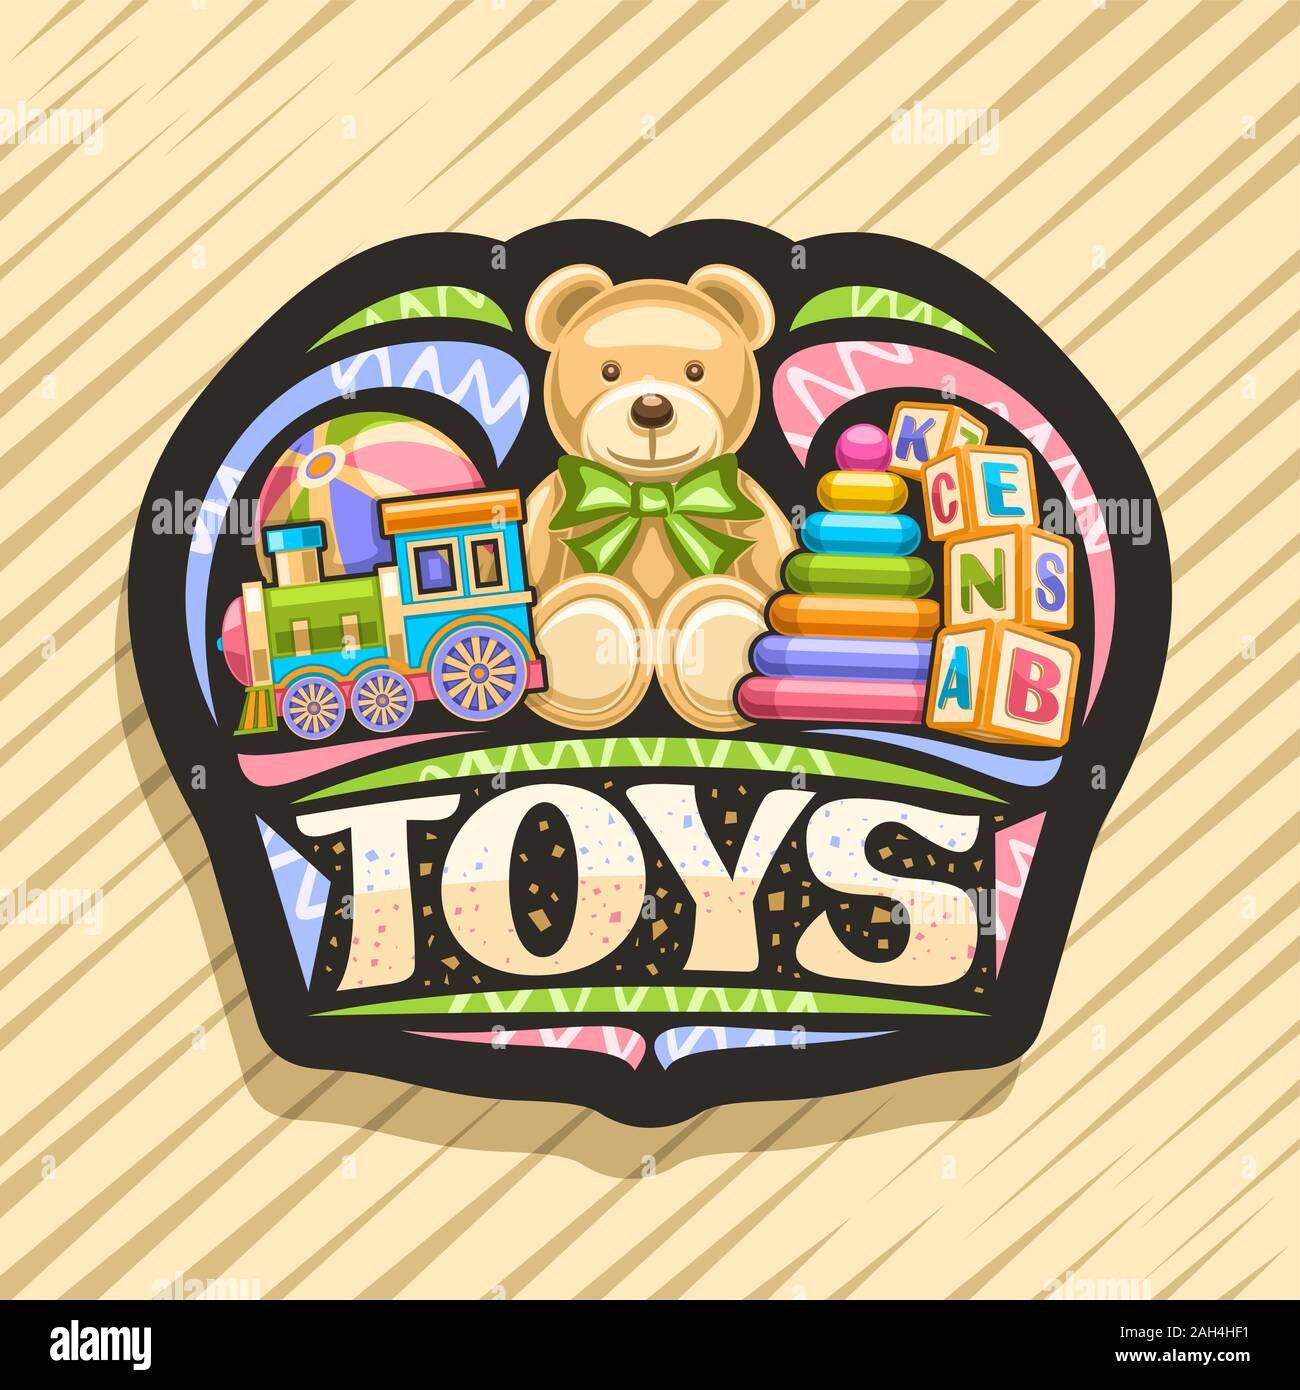 Vector logo for Kids Toys, black decorative sign board with illustration of steam train, inflatable ball, plush teddy bear, plastic pyramid and wooden Stock Vector